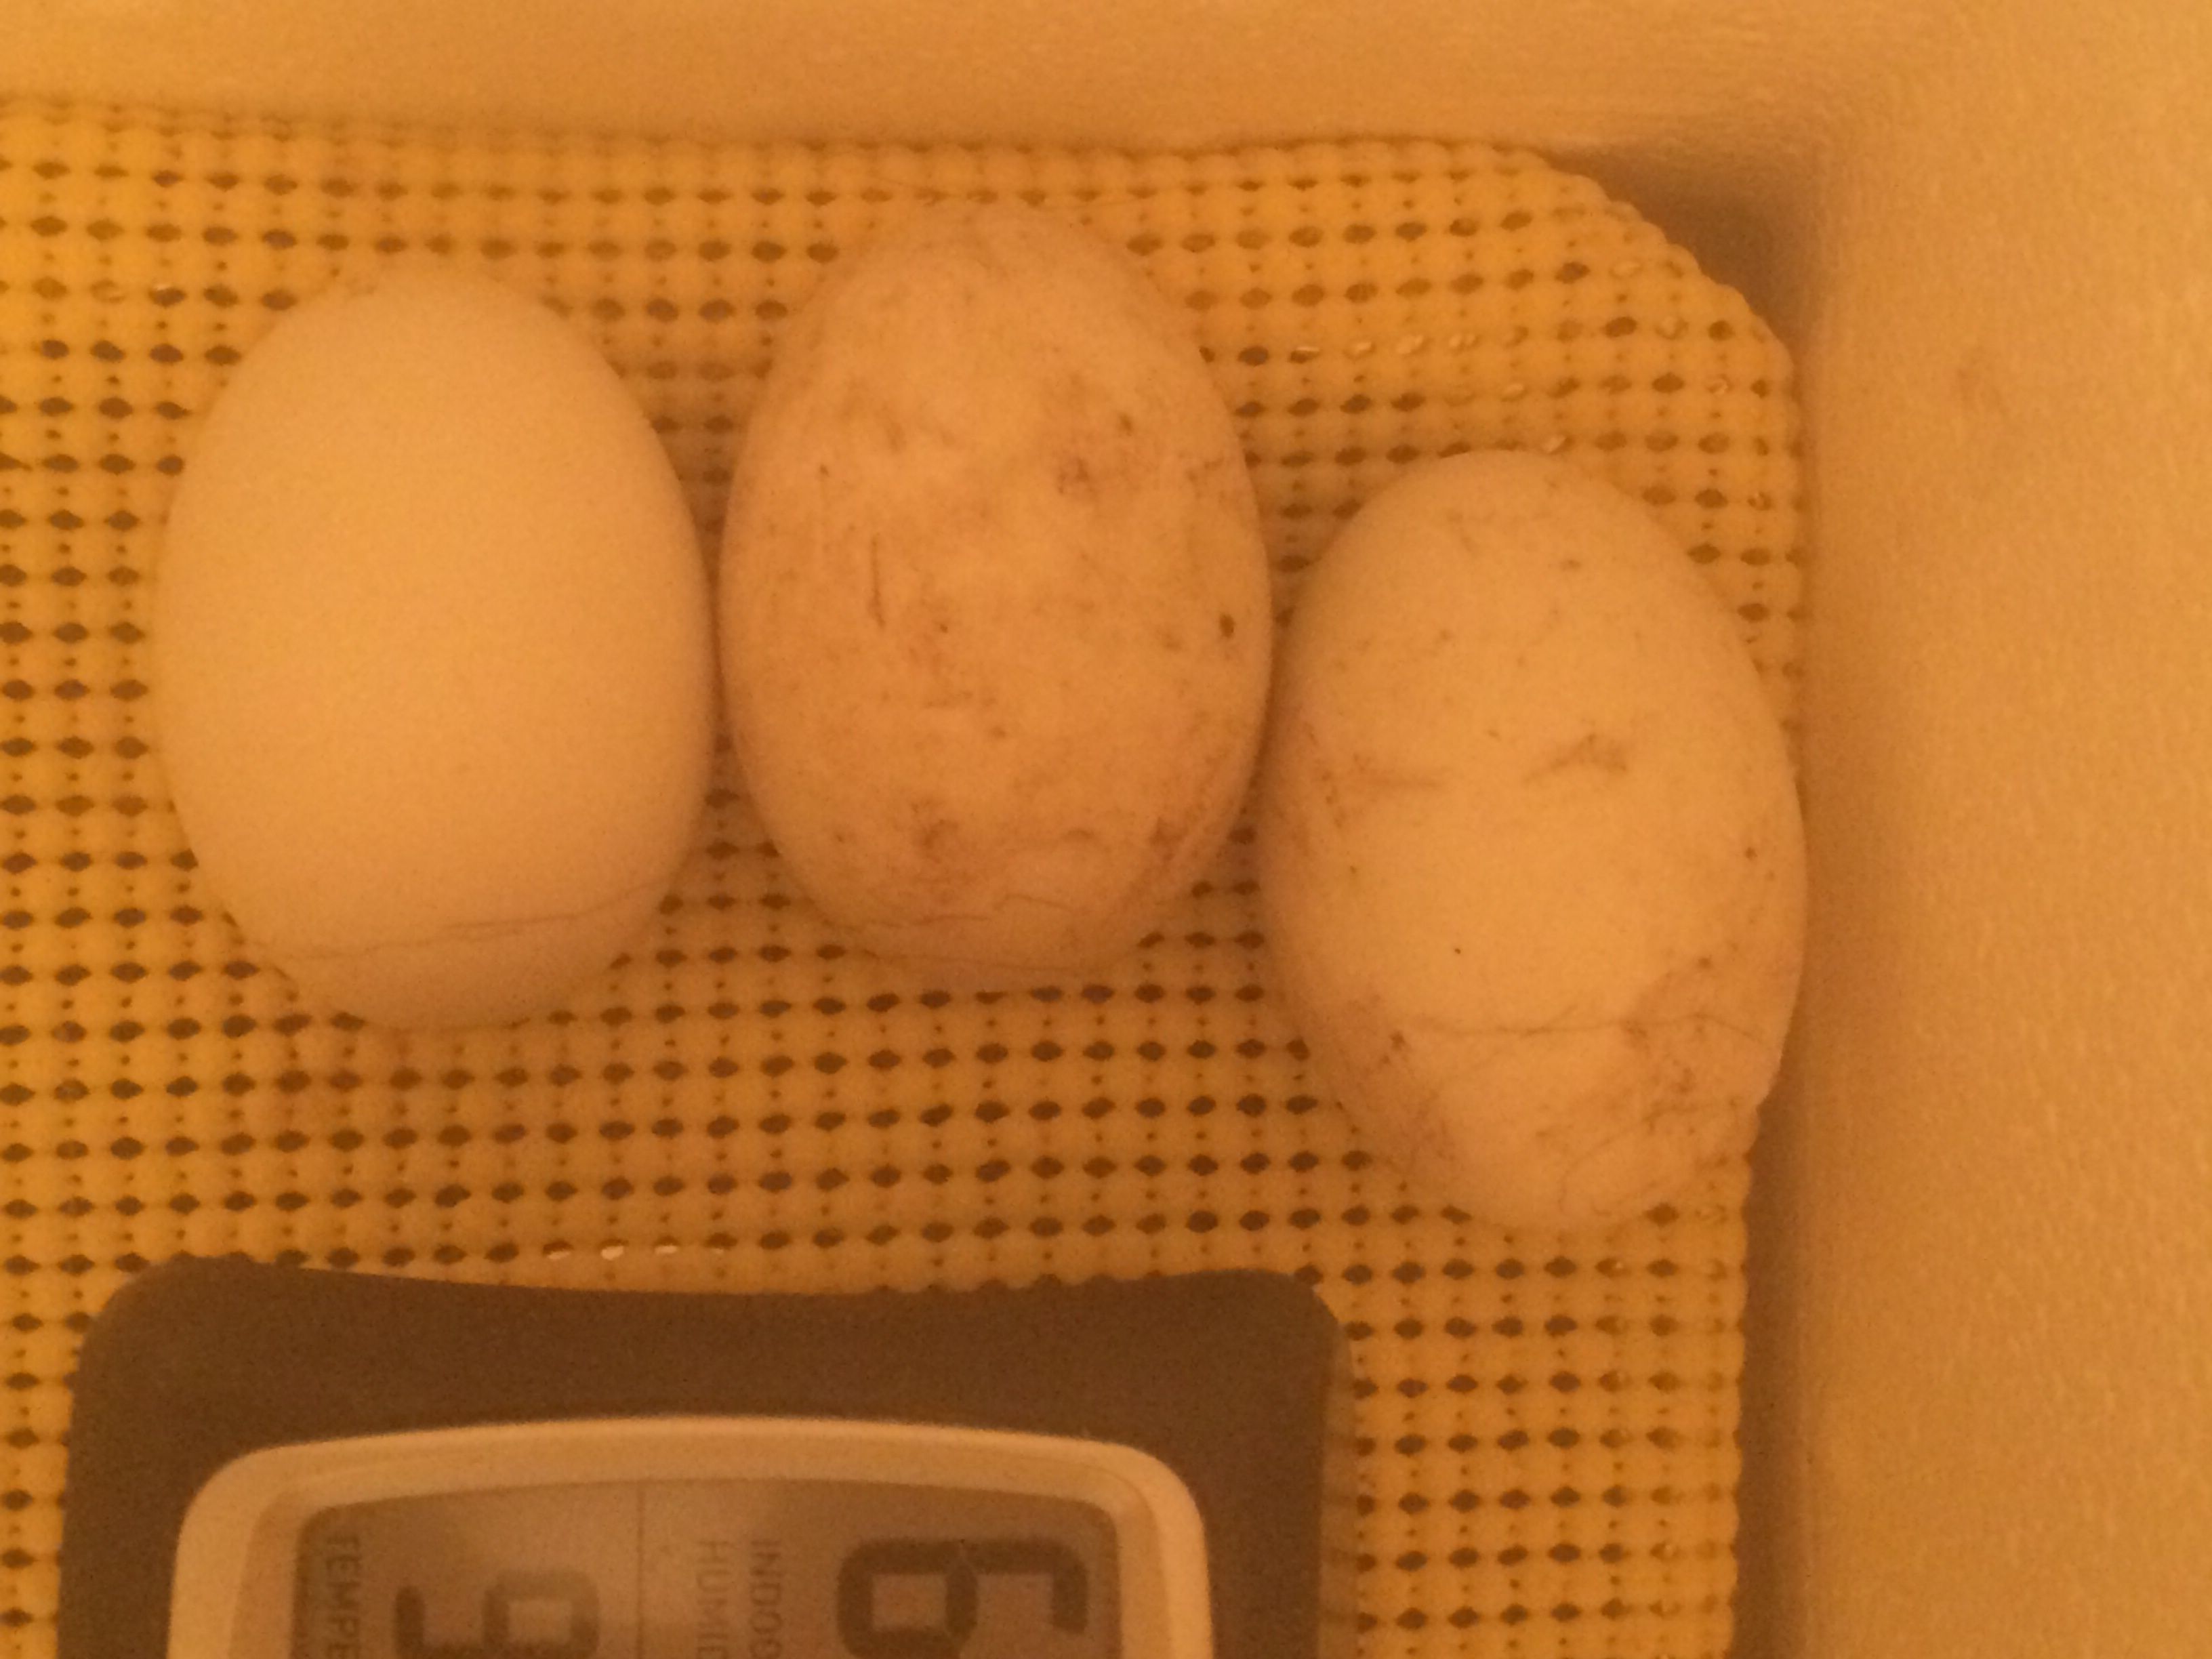 First duck egg incubation and hatch attempt day 28. Supposed to be hatch day!